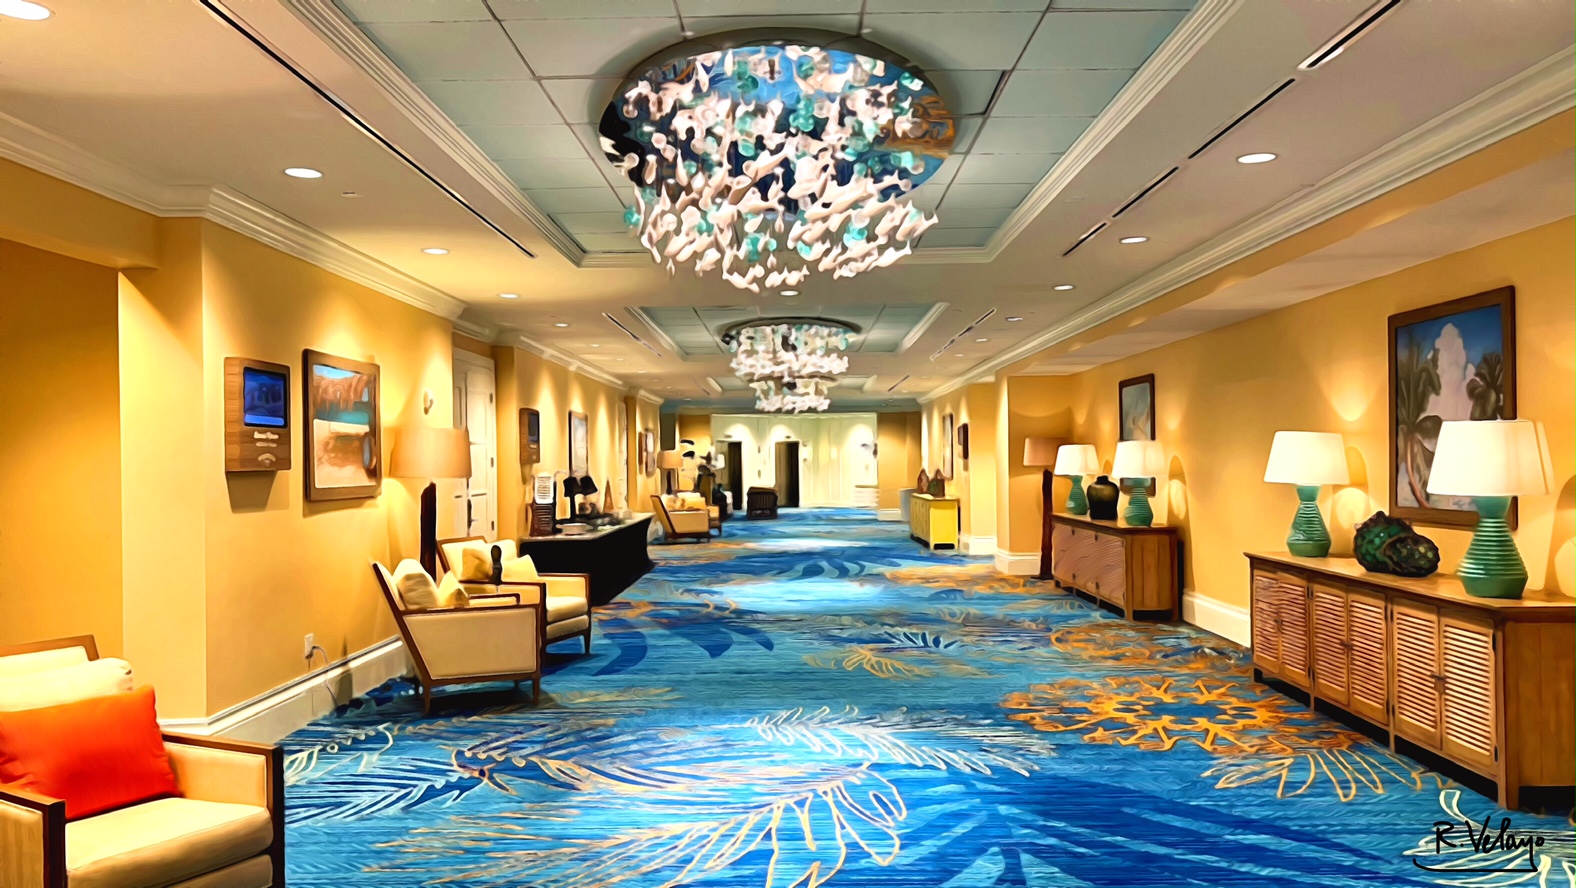 "HALLWAY AT MARGARITAVILLE’S CONFERENCE CENTER" [Created: 1/27/2021]